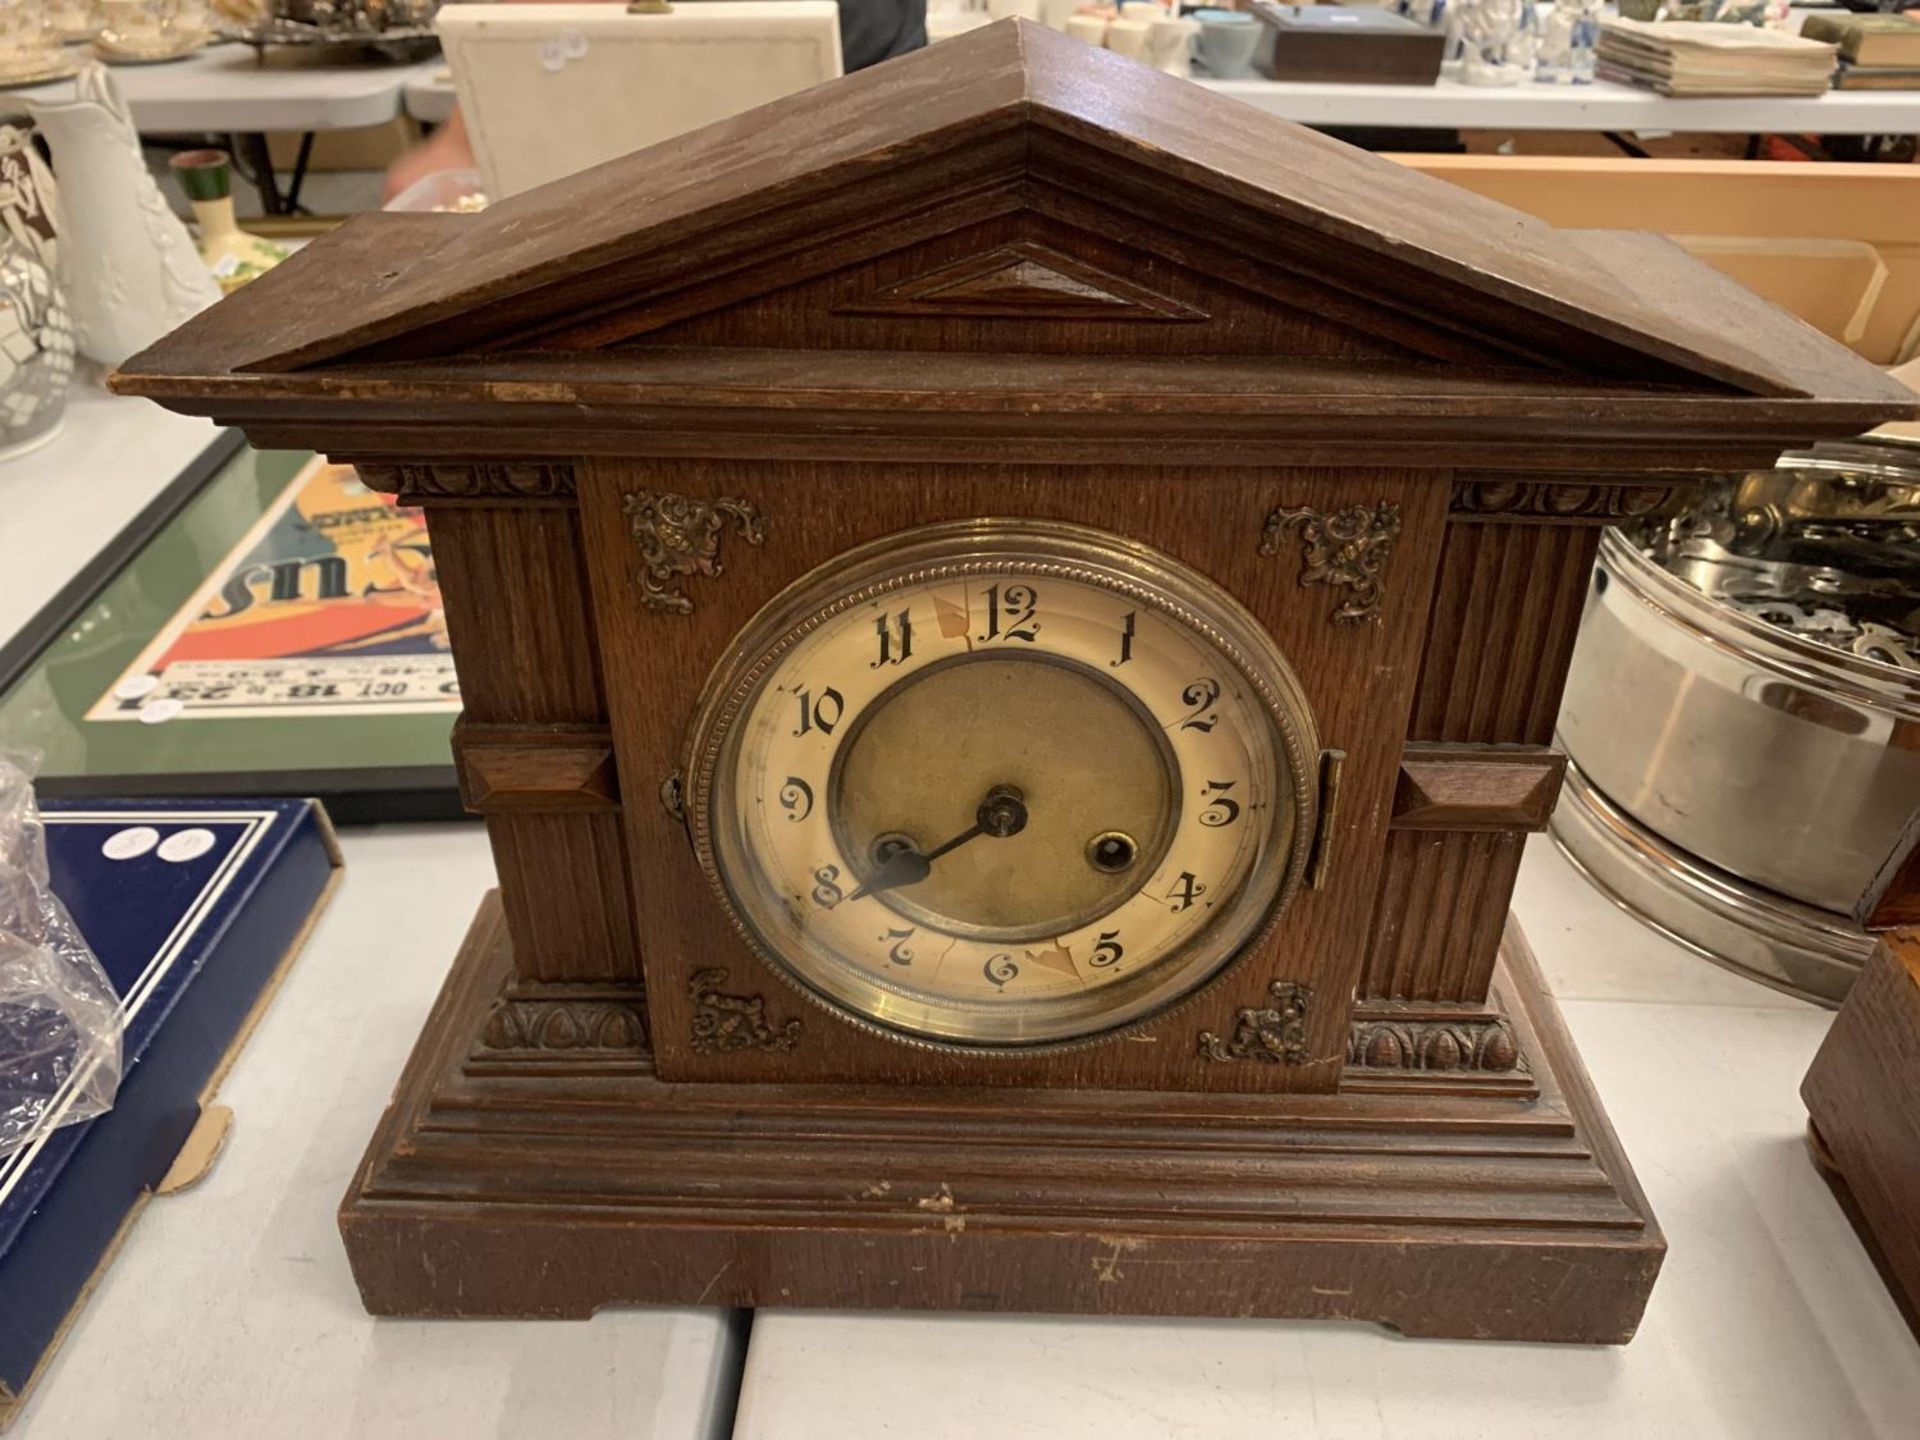 A WOODEN CASED MANTLE CLOCK COMPLETE WITH PENDULUM AND KEY